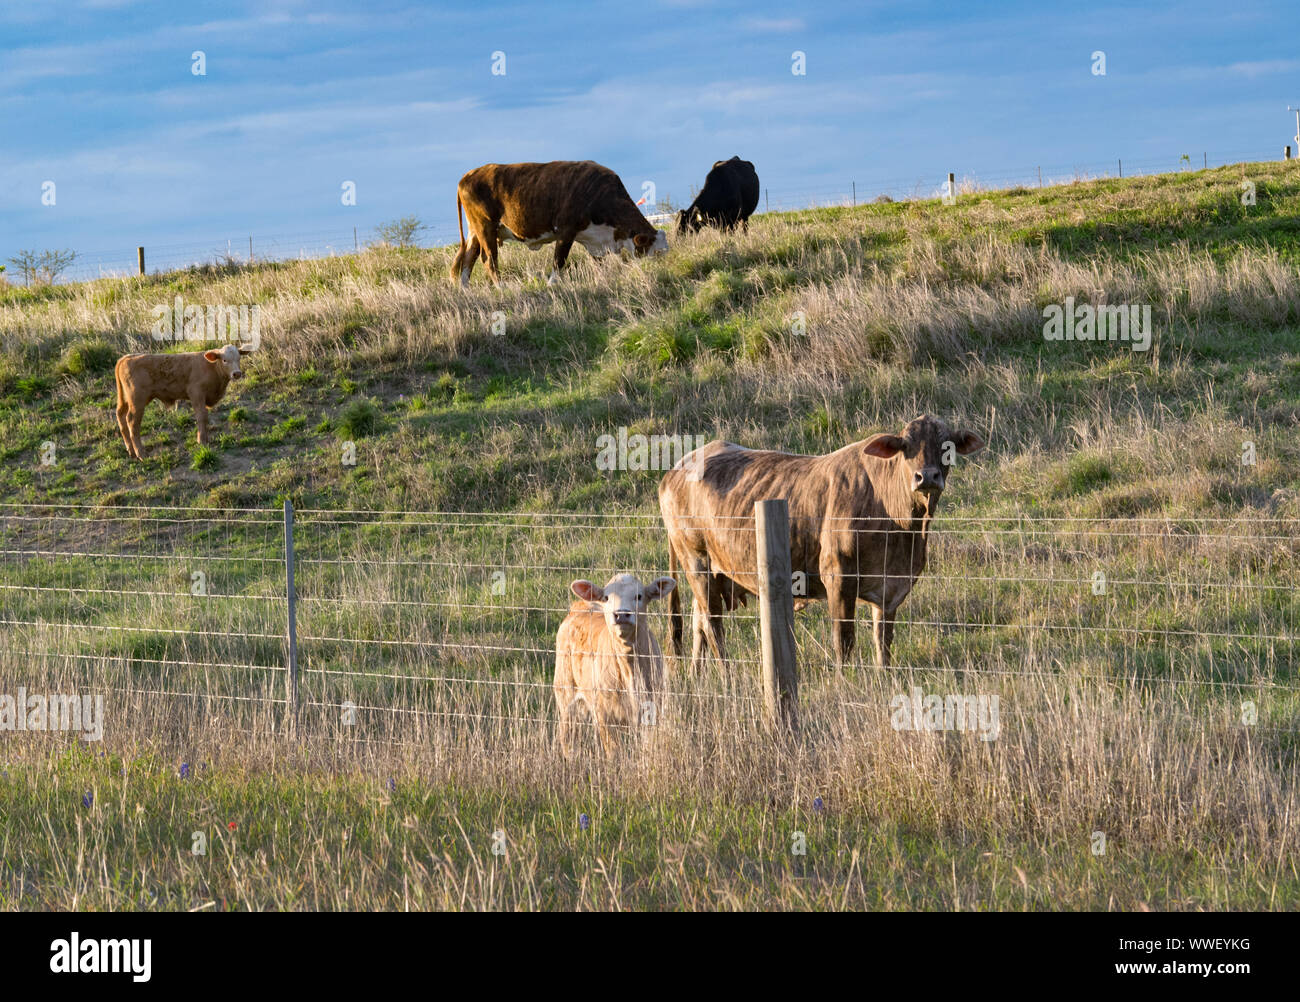 Texas Cattle grazing on a hill at sunset Stock Photo